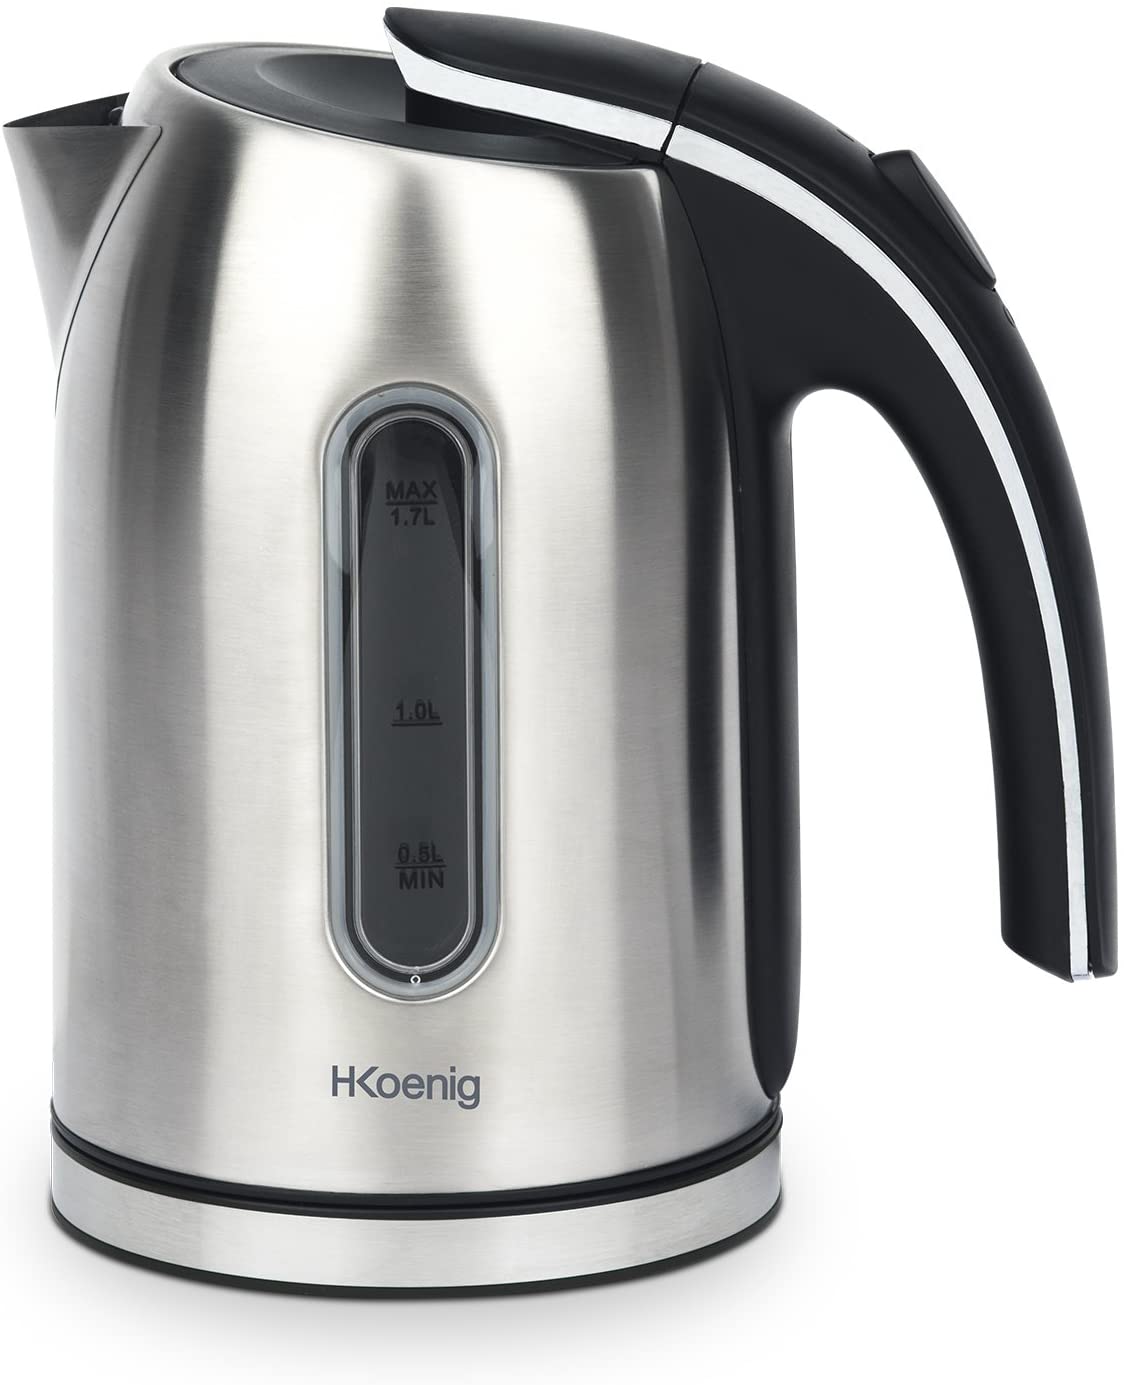 H.Koenig BO17 Kettle / 1.7 L / Water Level Indicator / 2200 W / Stainless Steel / Silver